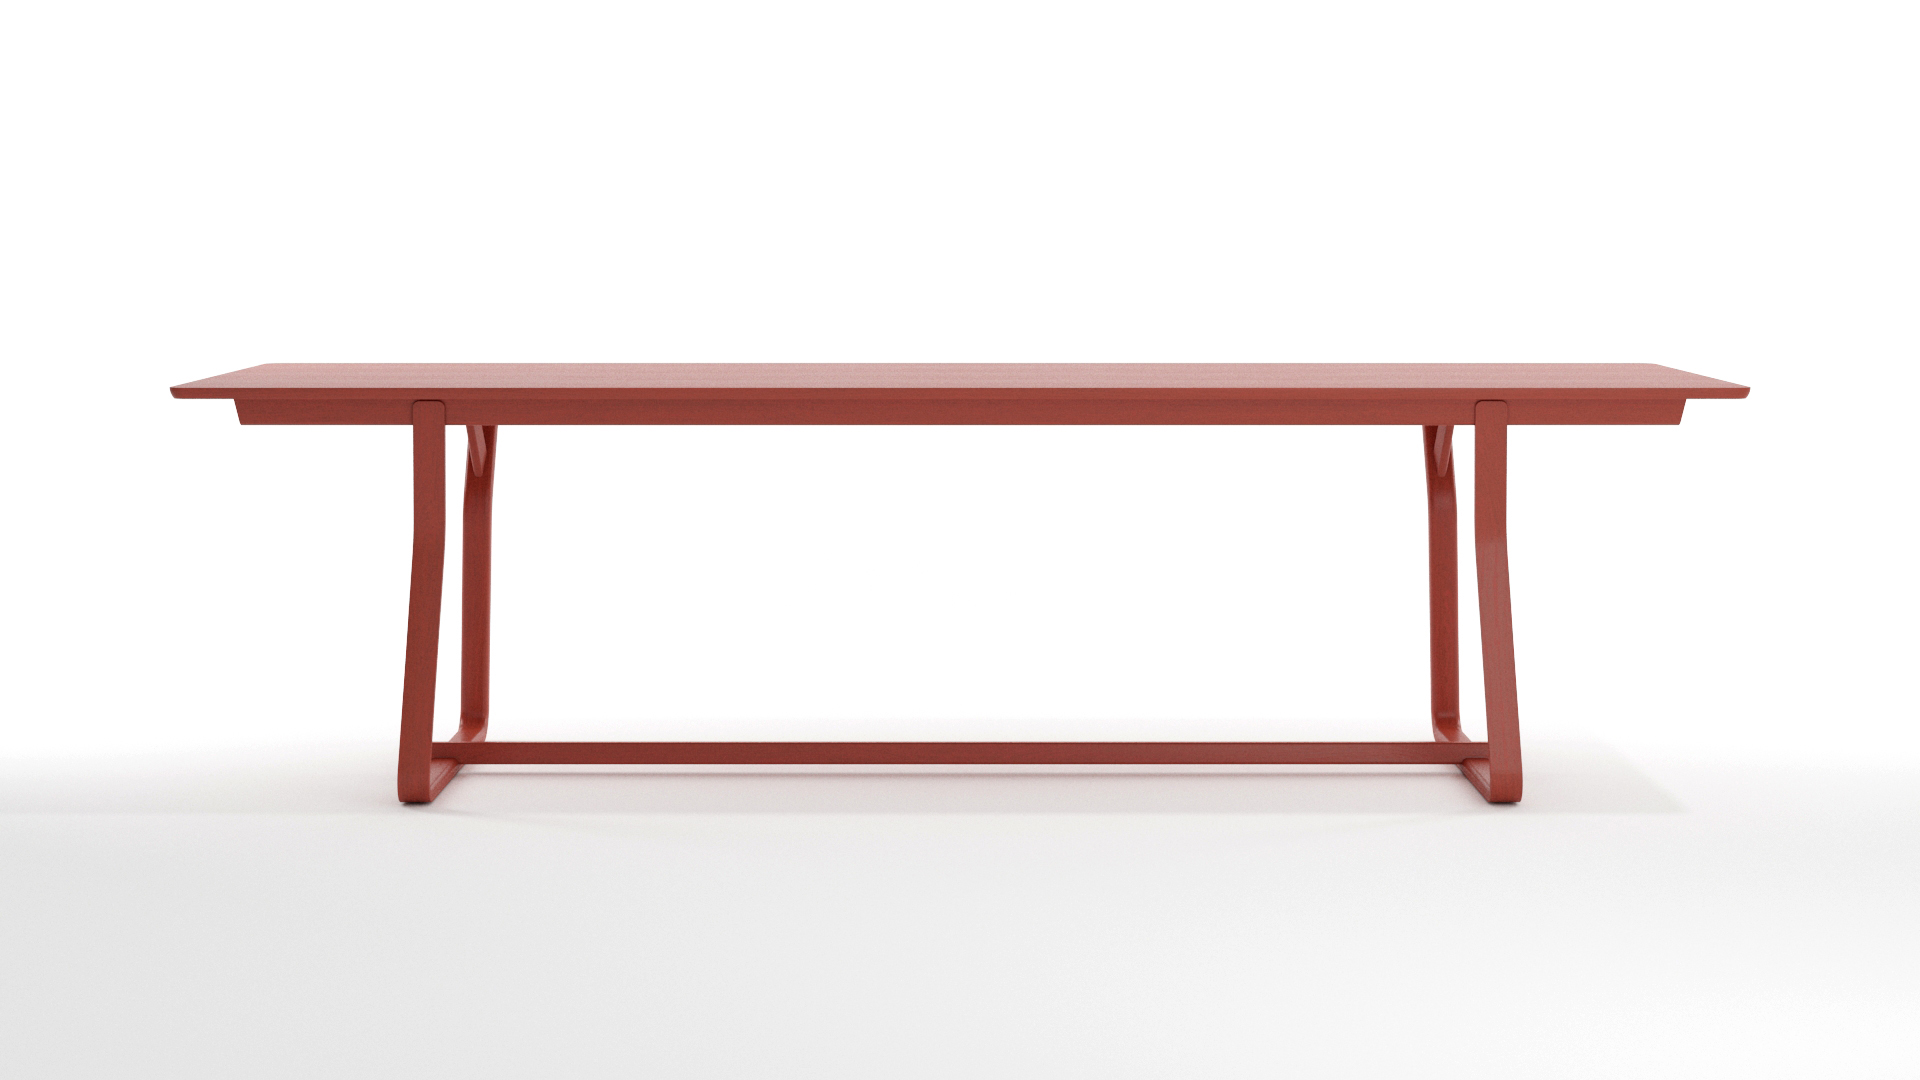 Red stained wooden table for use as contract furniture in offices, libraries or educational spaces.